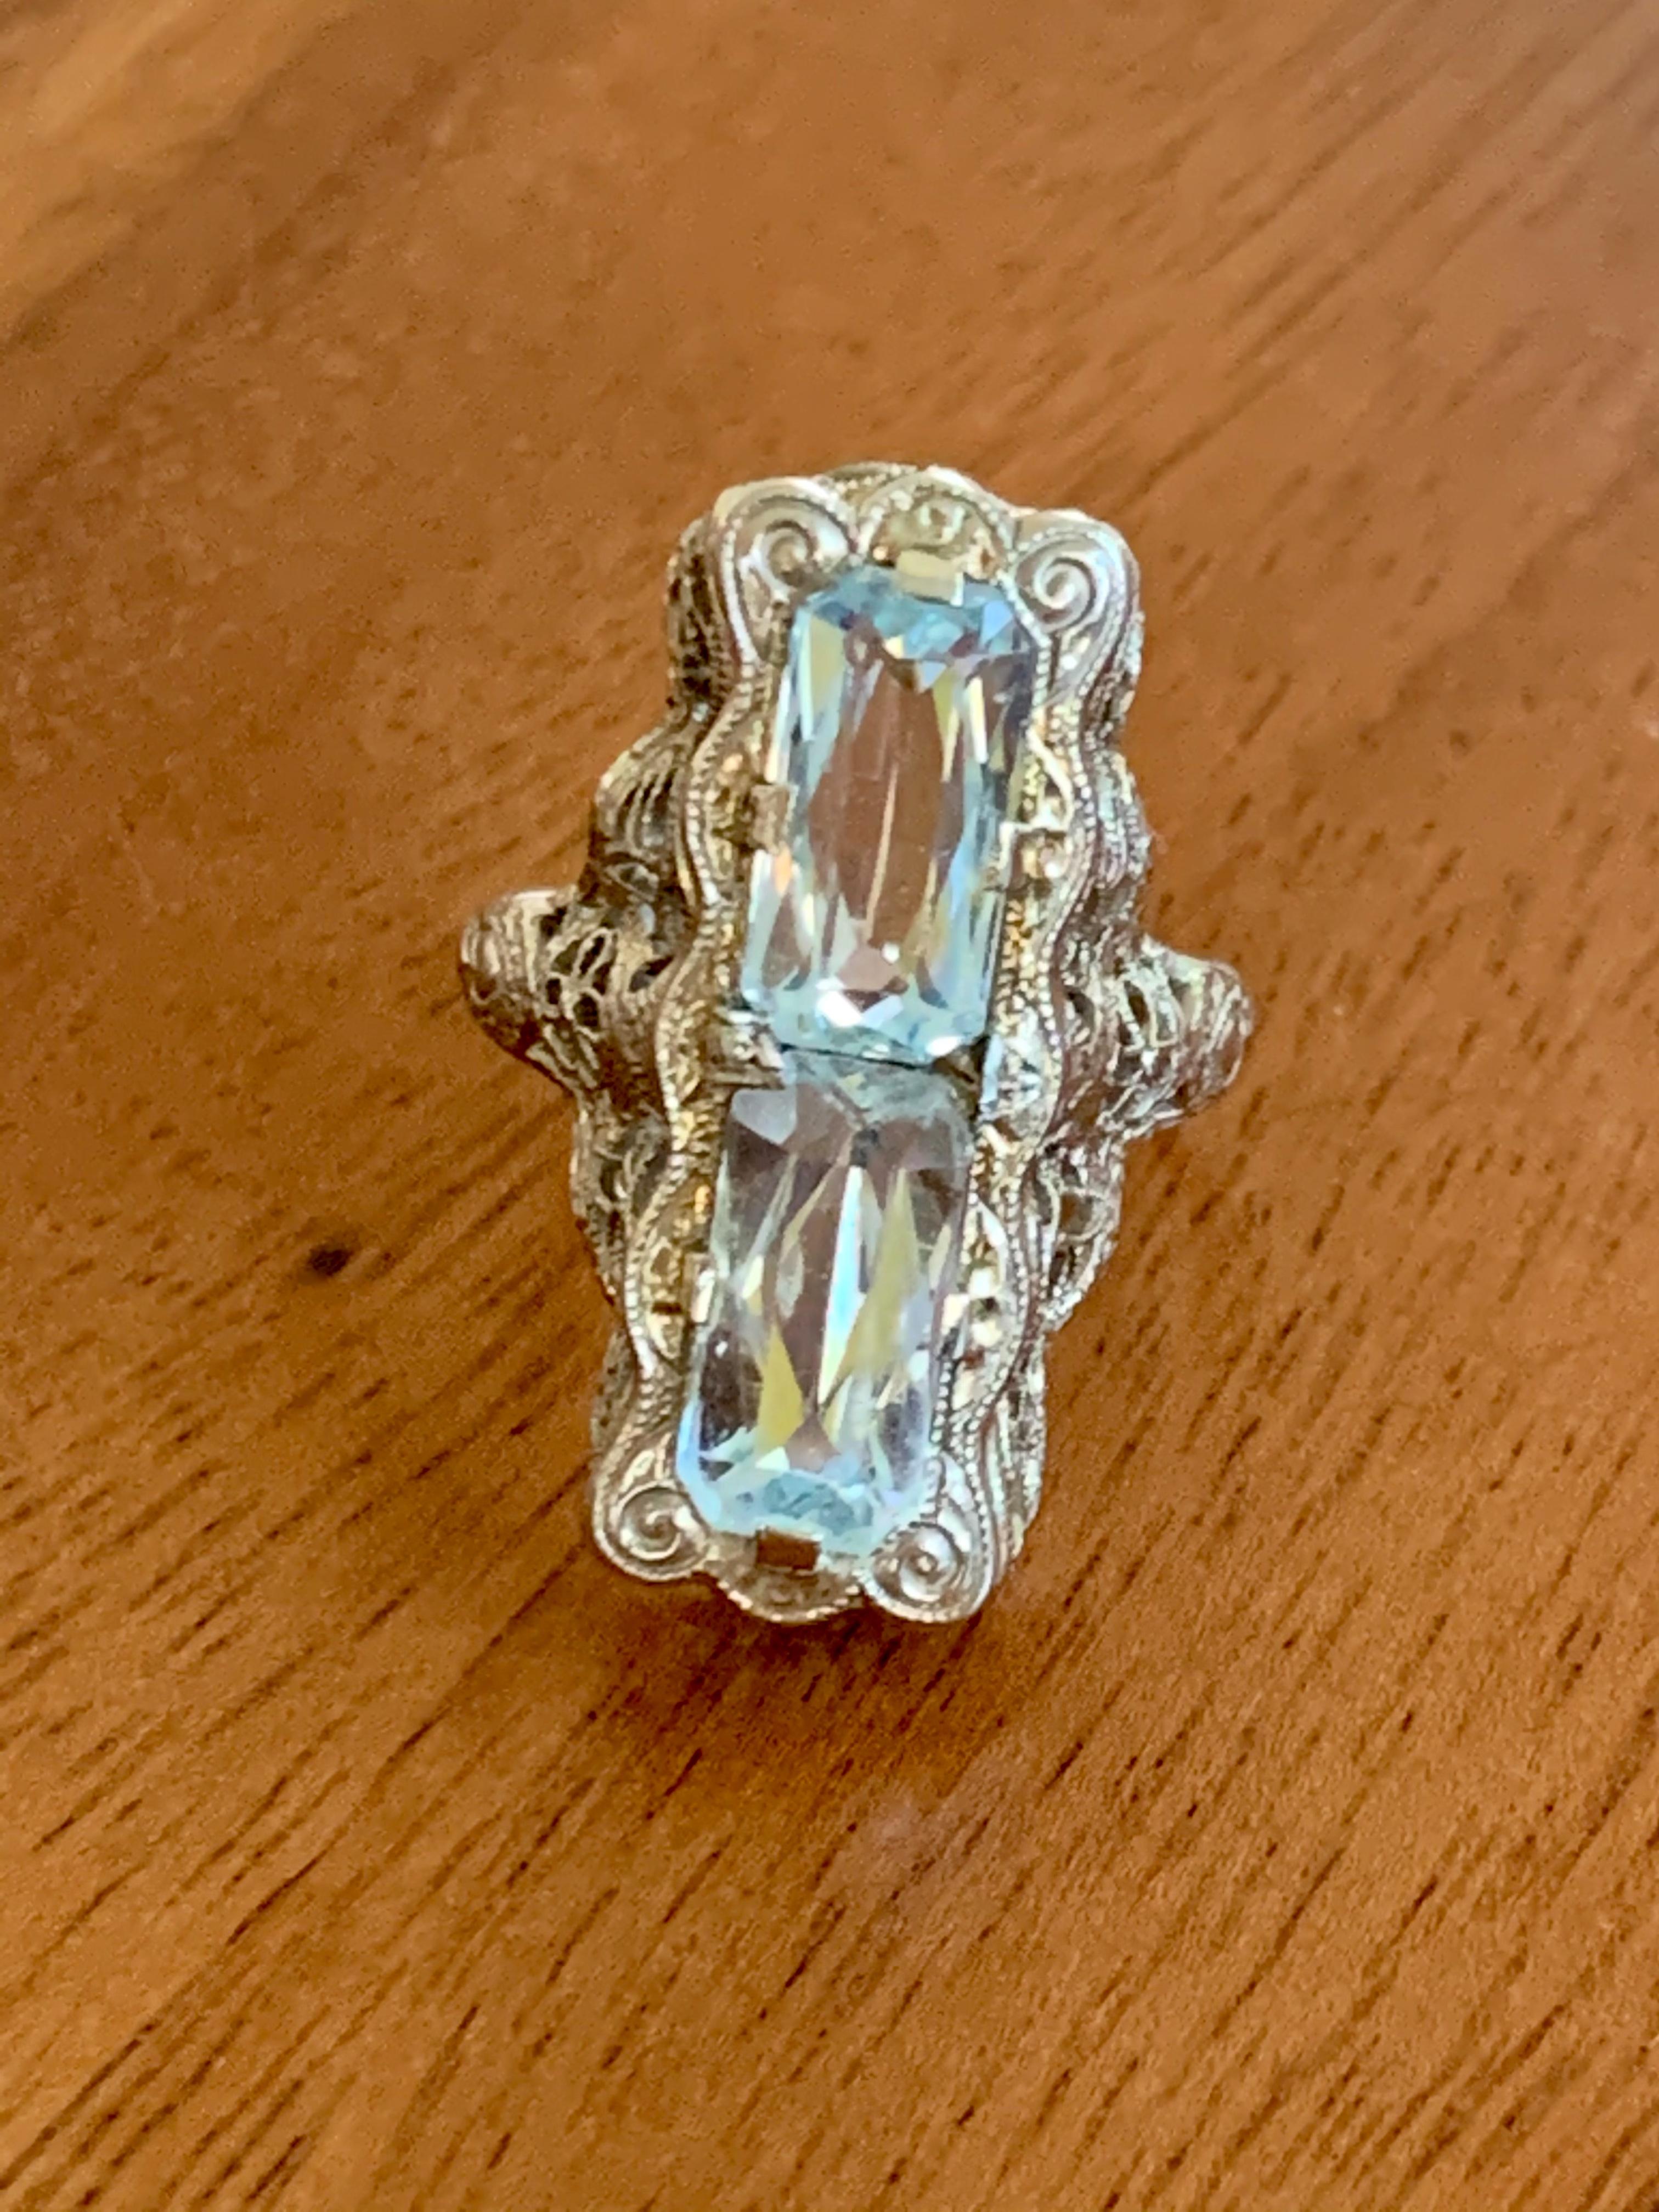 This beautiful, antique ring features two Aquamarine stones which are emerald cut and approximately 9 x 5mm in size.  

The ring is stamped 